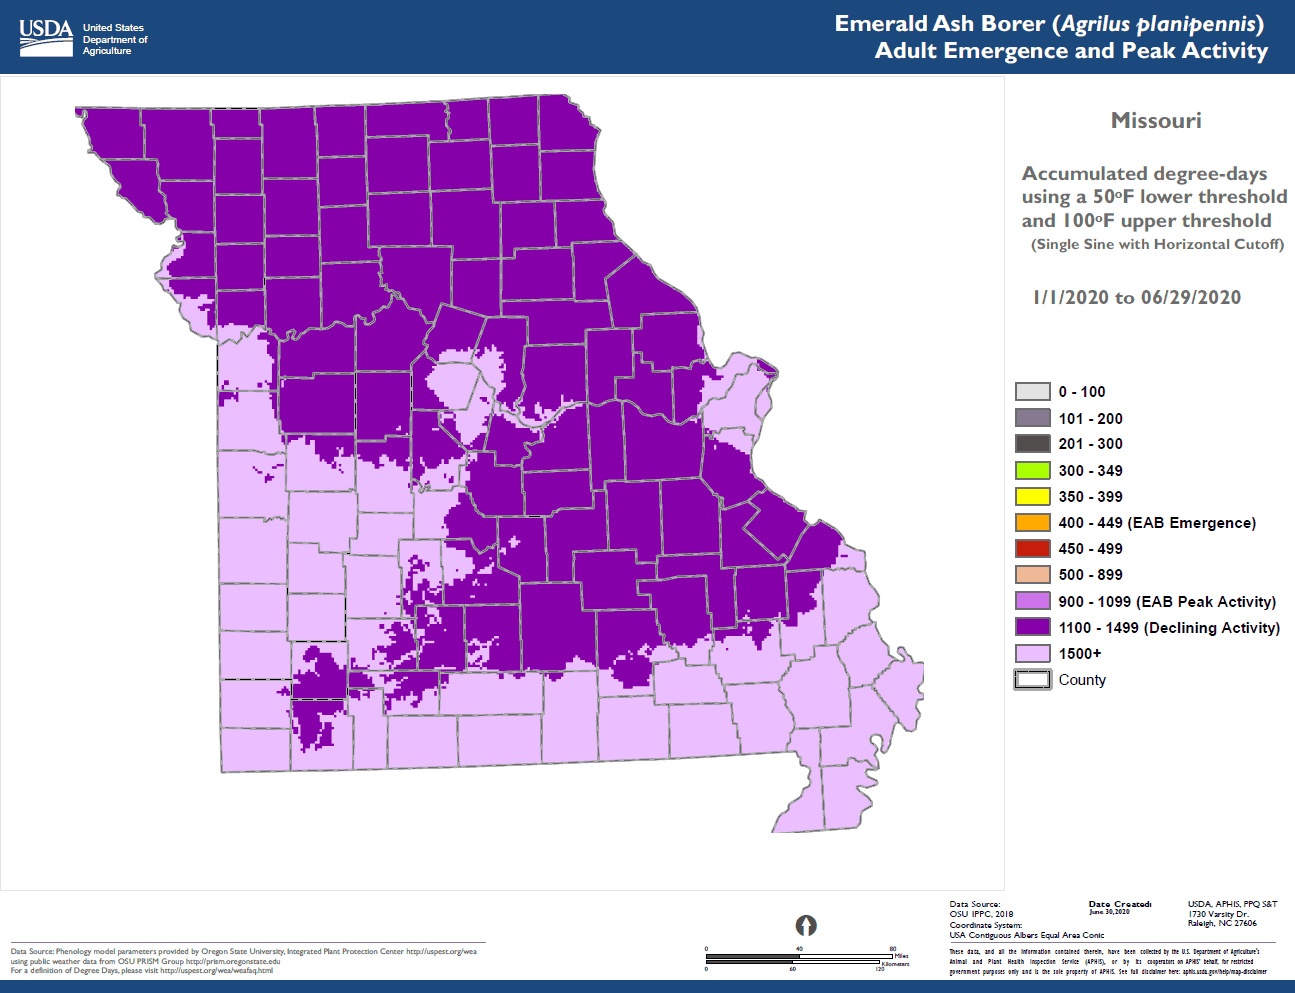 Map of Emerald Ash Borer Degree Days Emergence and Peak Activity, Jan. 1 to June 29, 2020.